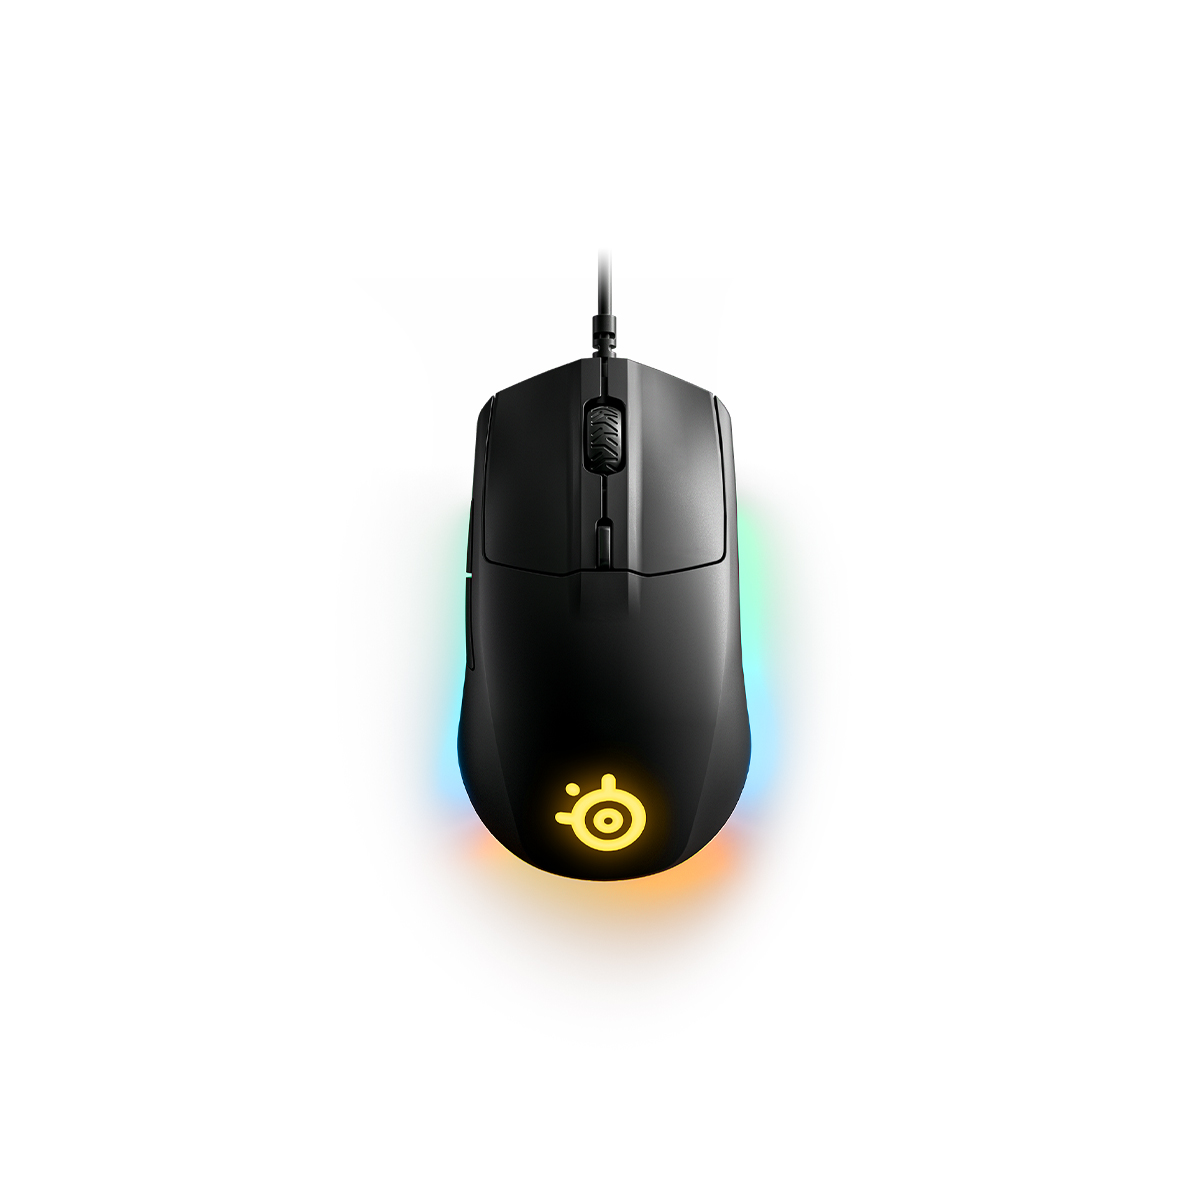 SteelSeries Rival 3 Gaming Mouse - 8,500 CPI TrueMove Core Optical Sensor -  6 Programmable Buttons - Split Trigger Buttons - Brilliant Prism RGB